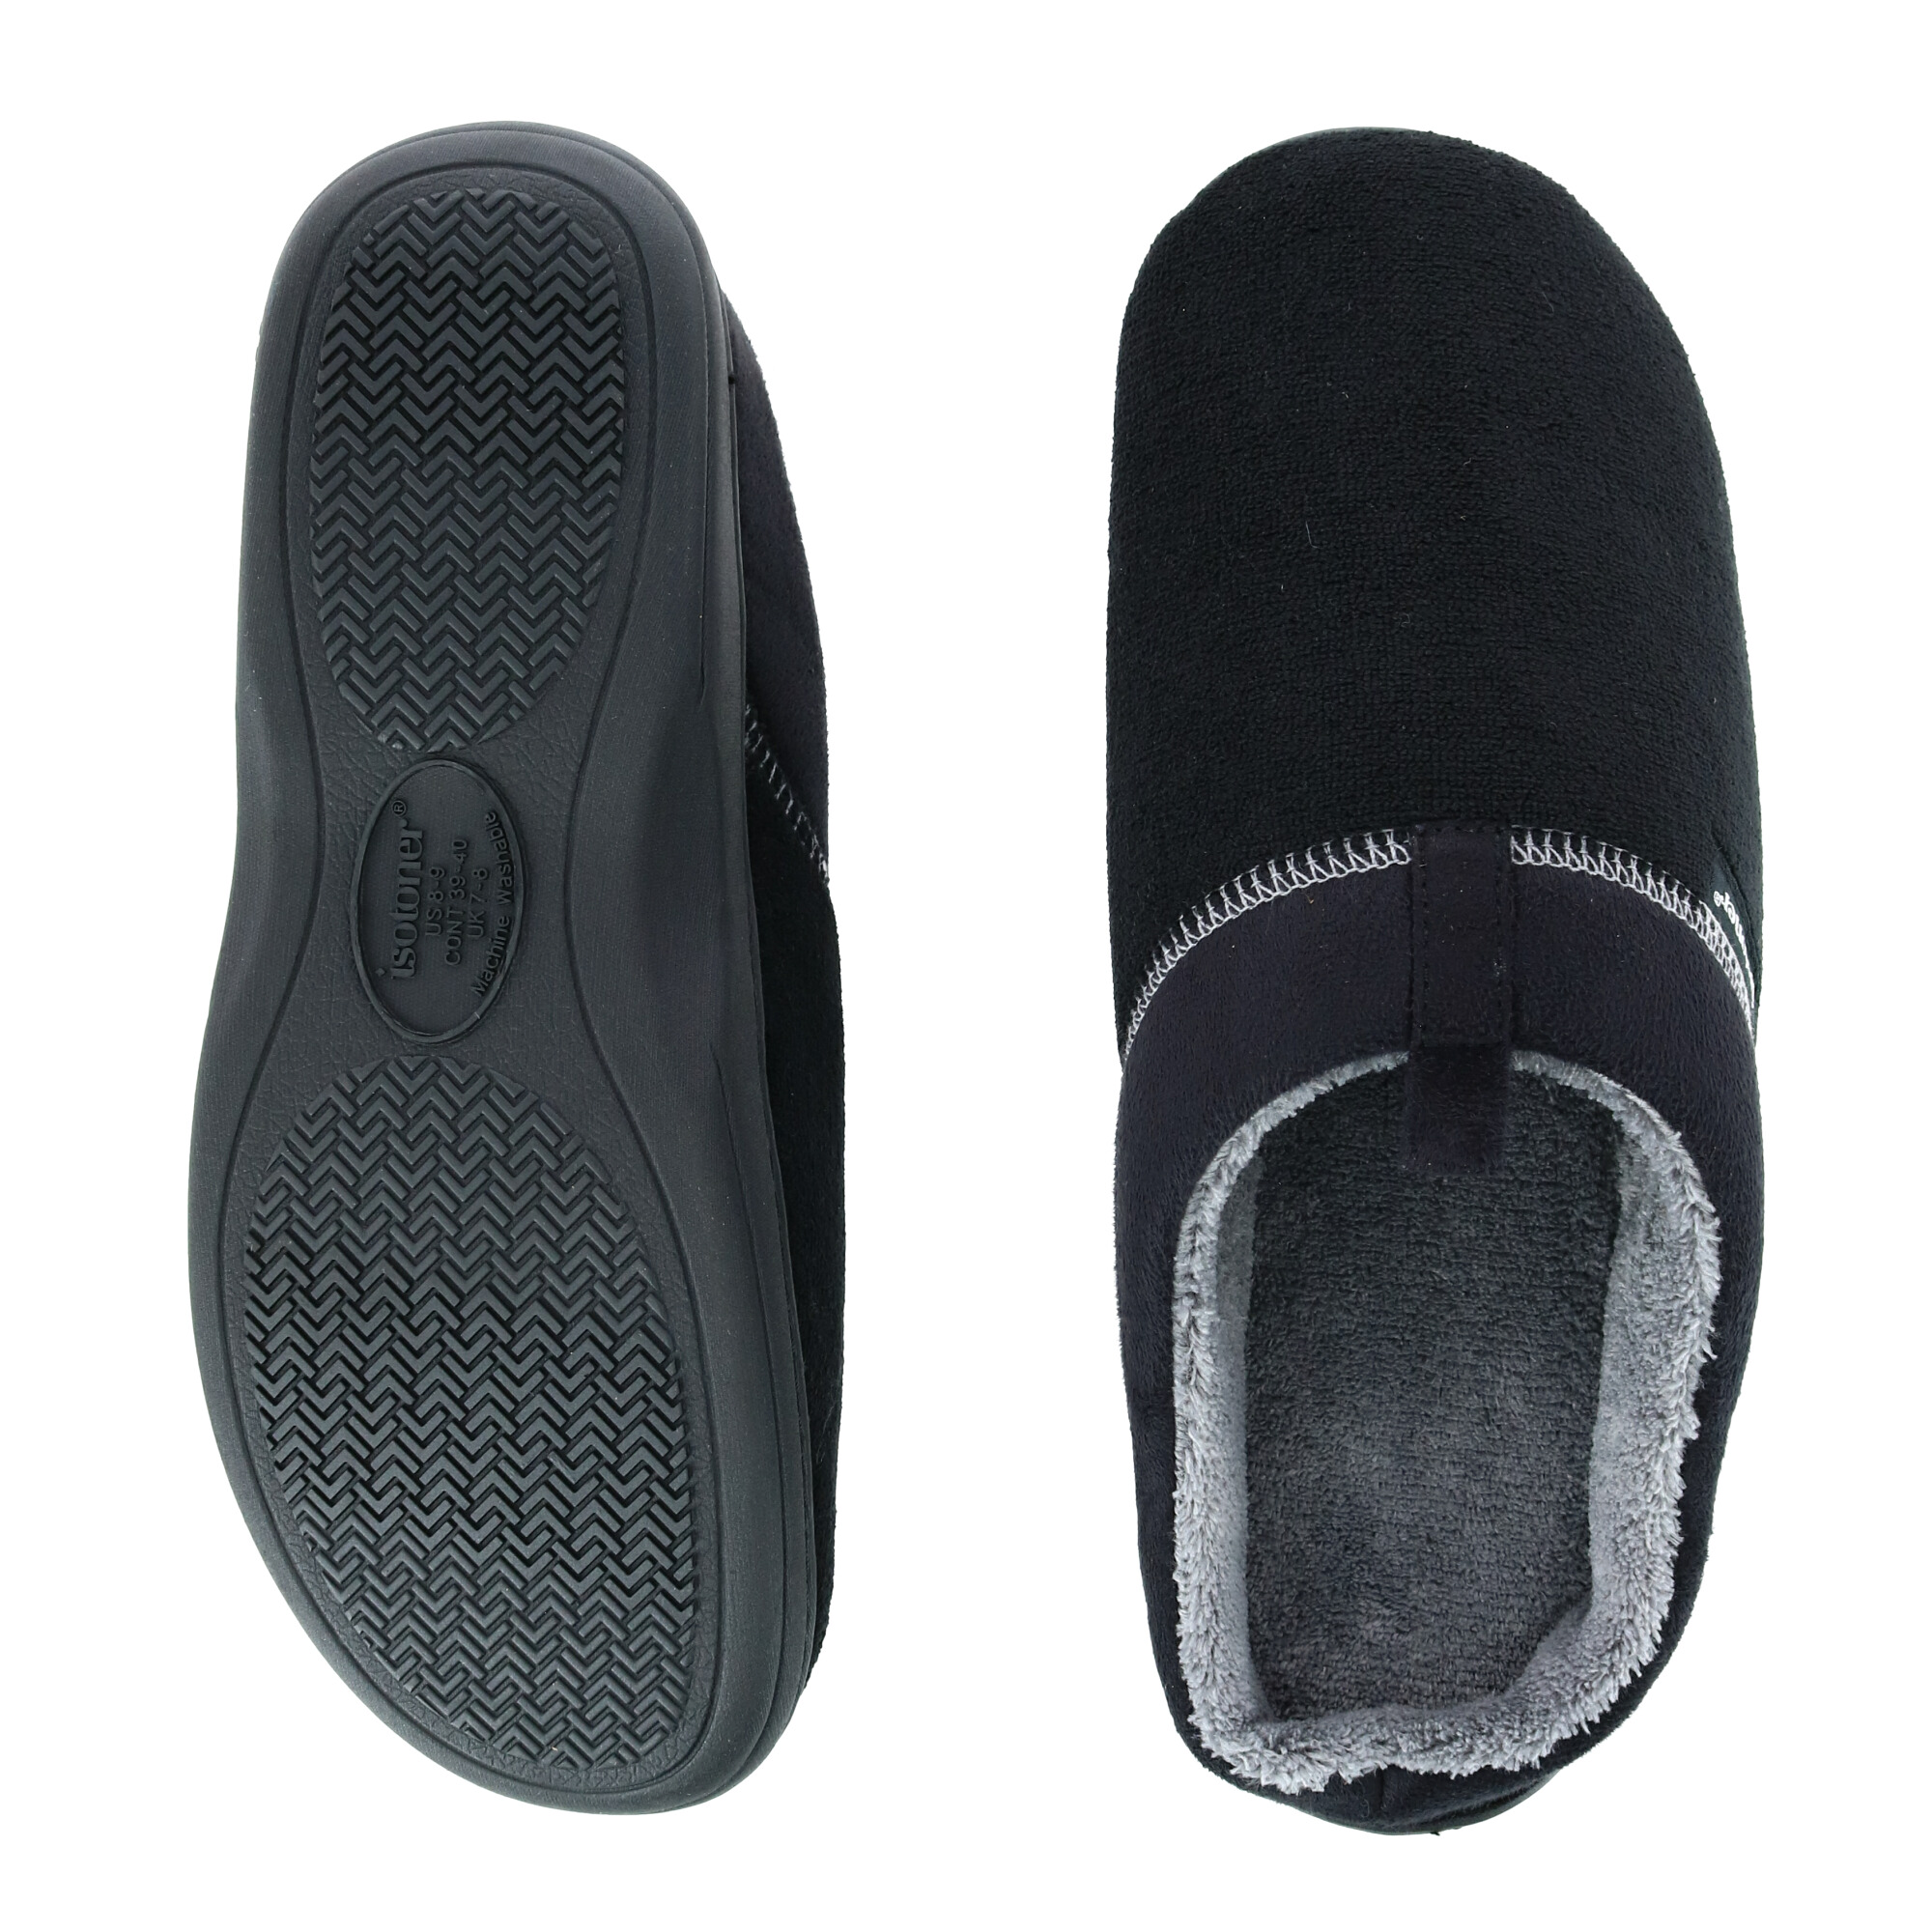 Isotoner Men's Microterry Jared Hoodback Slippers